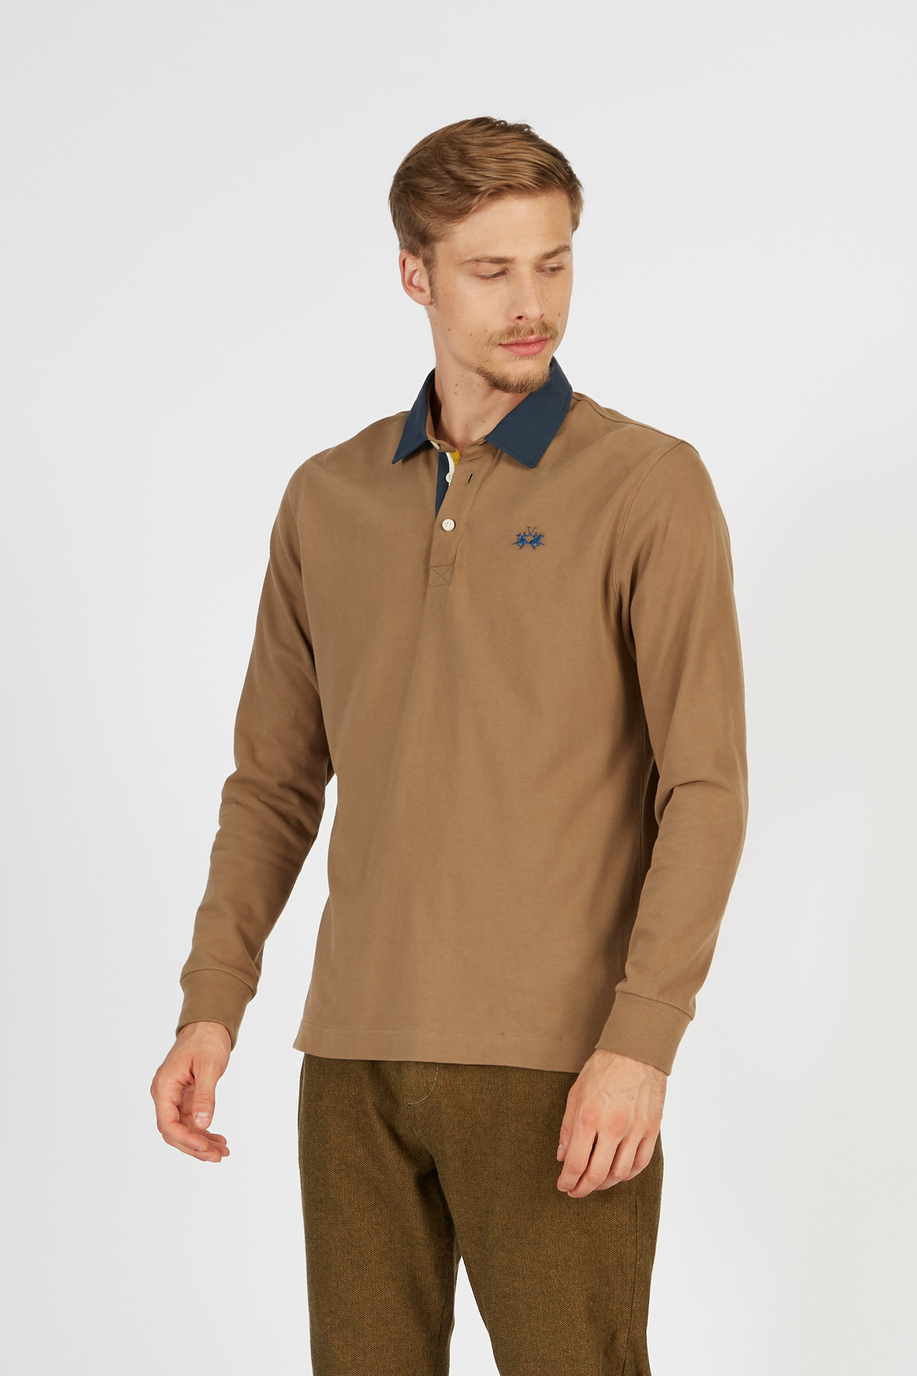 Men’s polo shirt with long sleeves in regular fit jersey cotton - Polo Shirts | La Martina - Official Online Shop